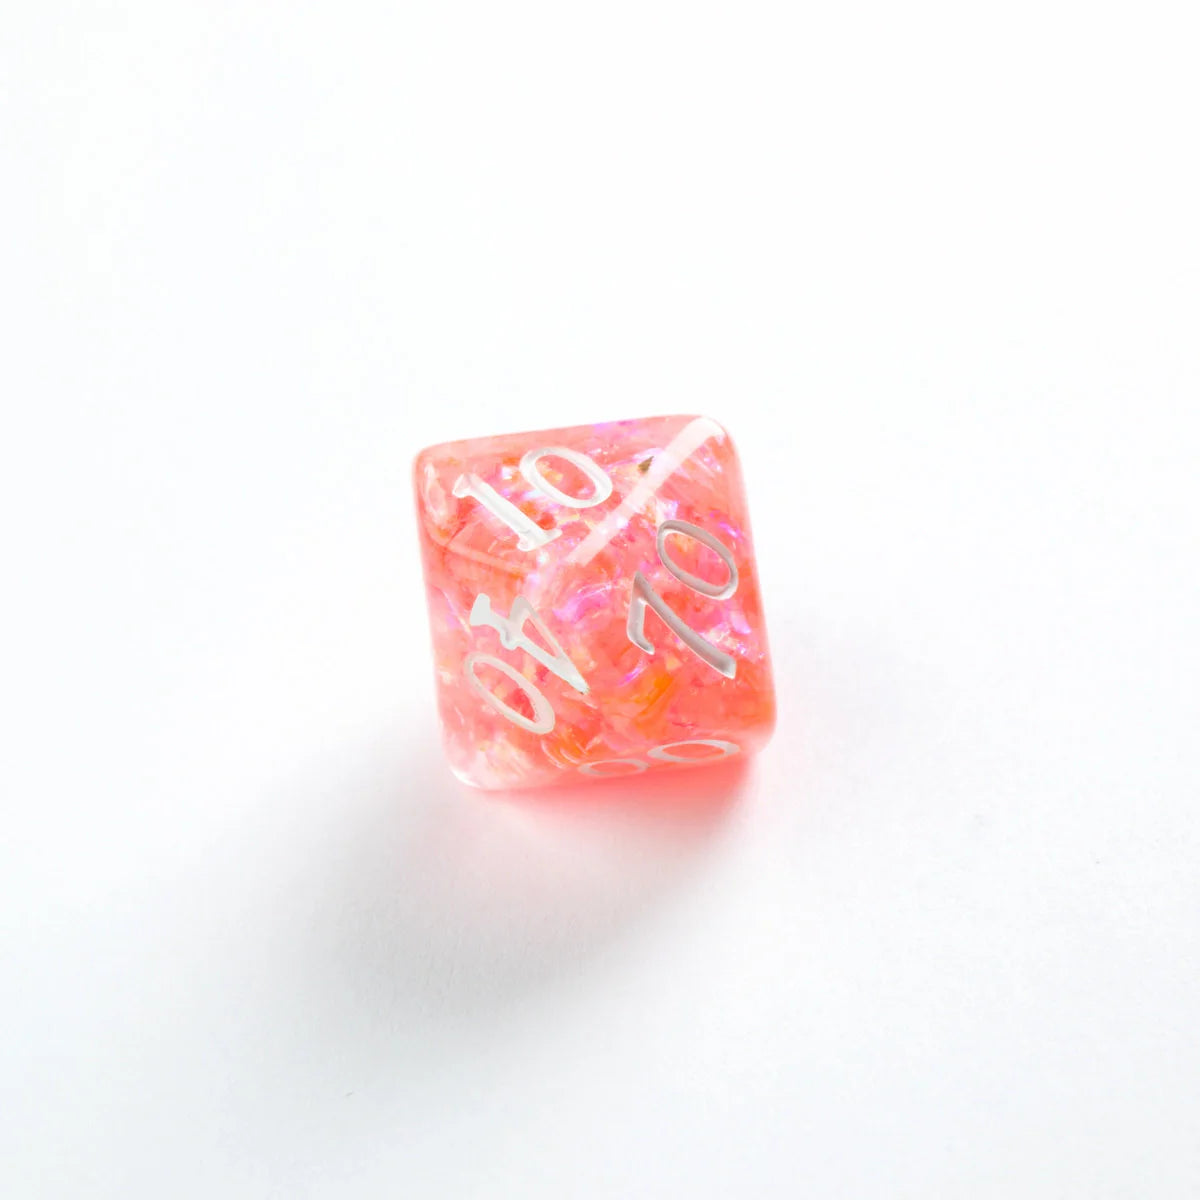 Gamegenic RPG Dice Set - Candy-Like Series - Peach